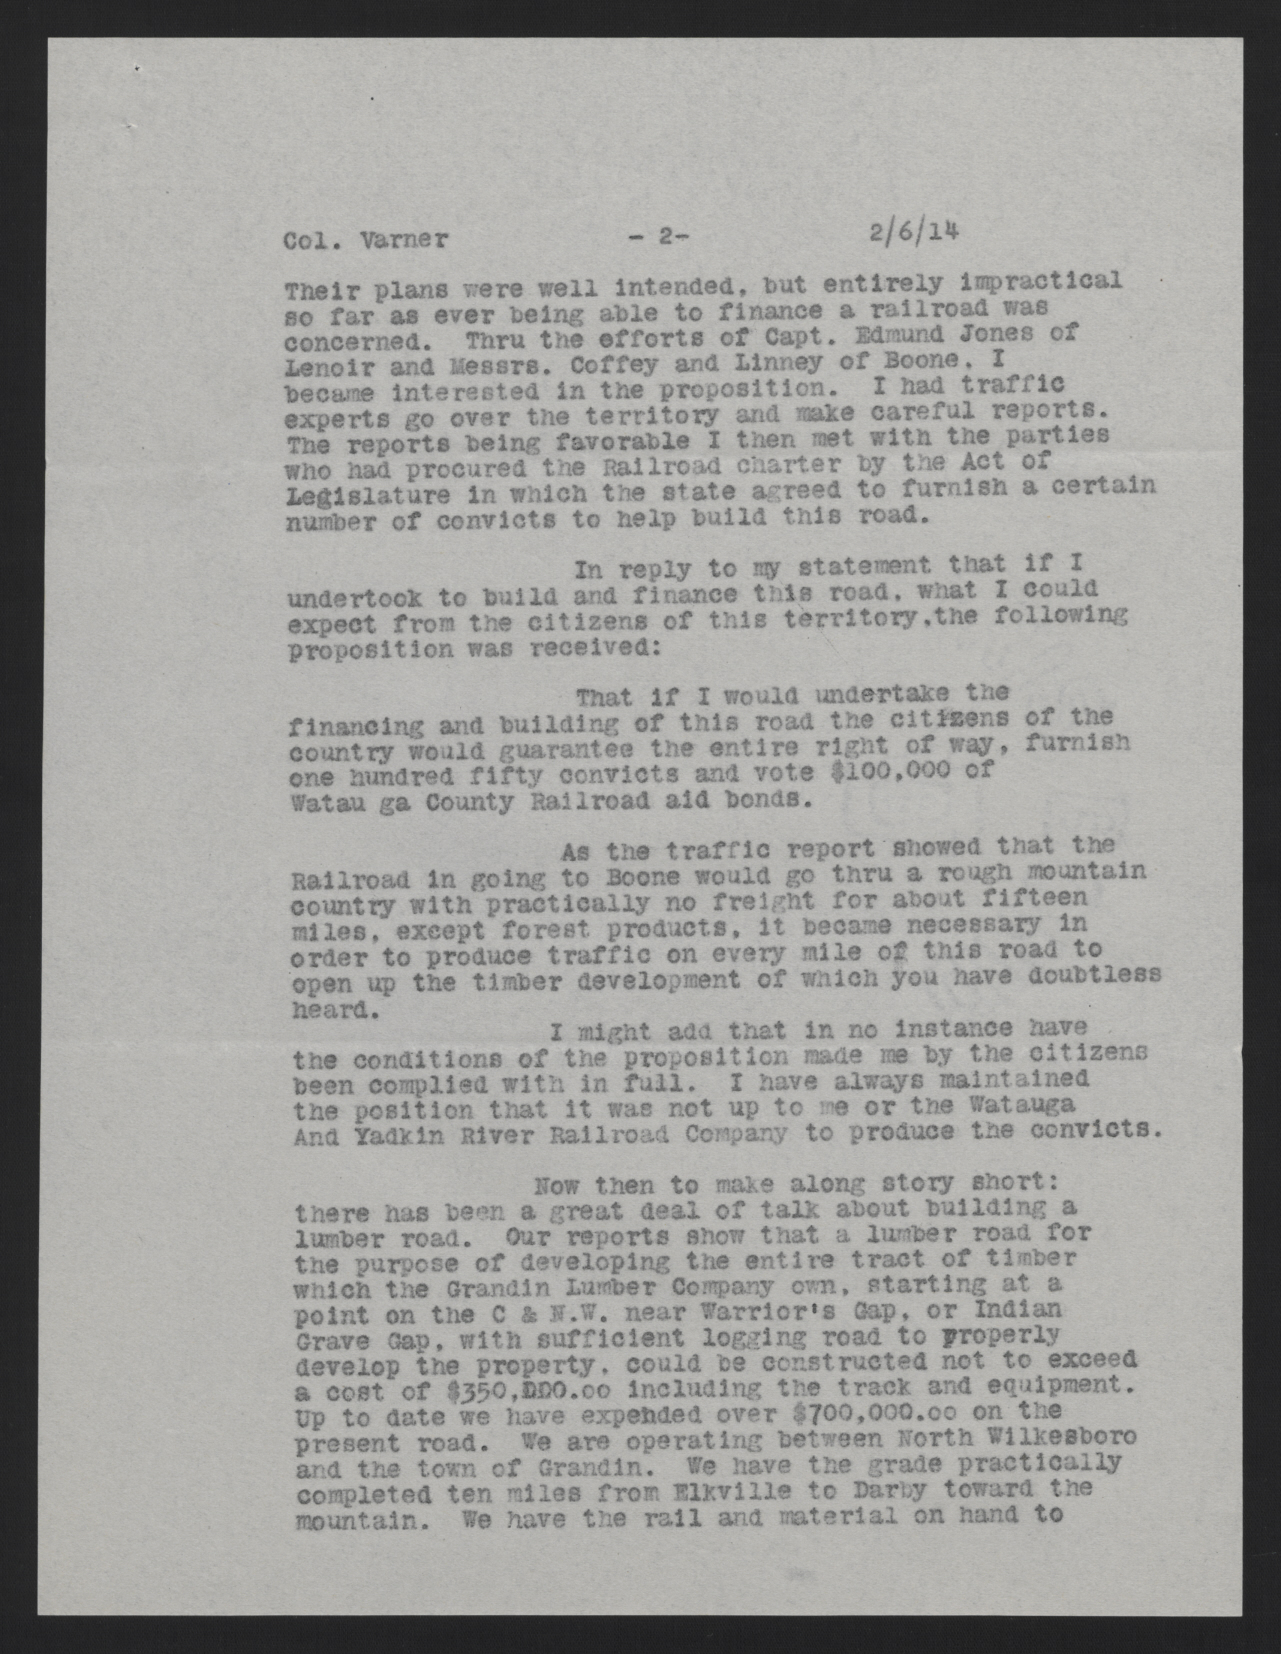 Letter from Grandin to Varner, February 6, 1914, page 2